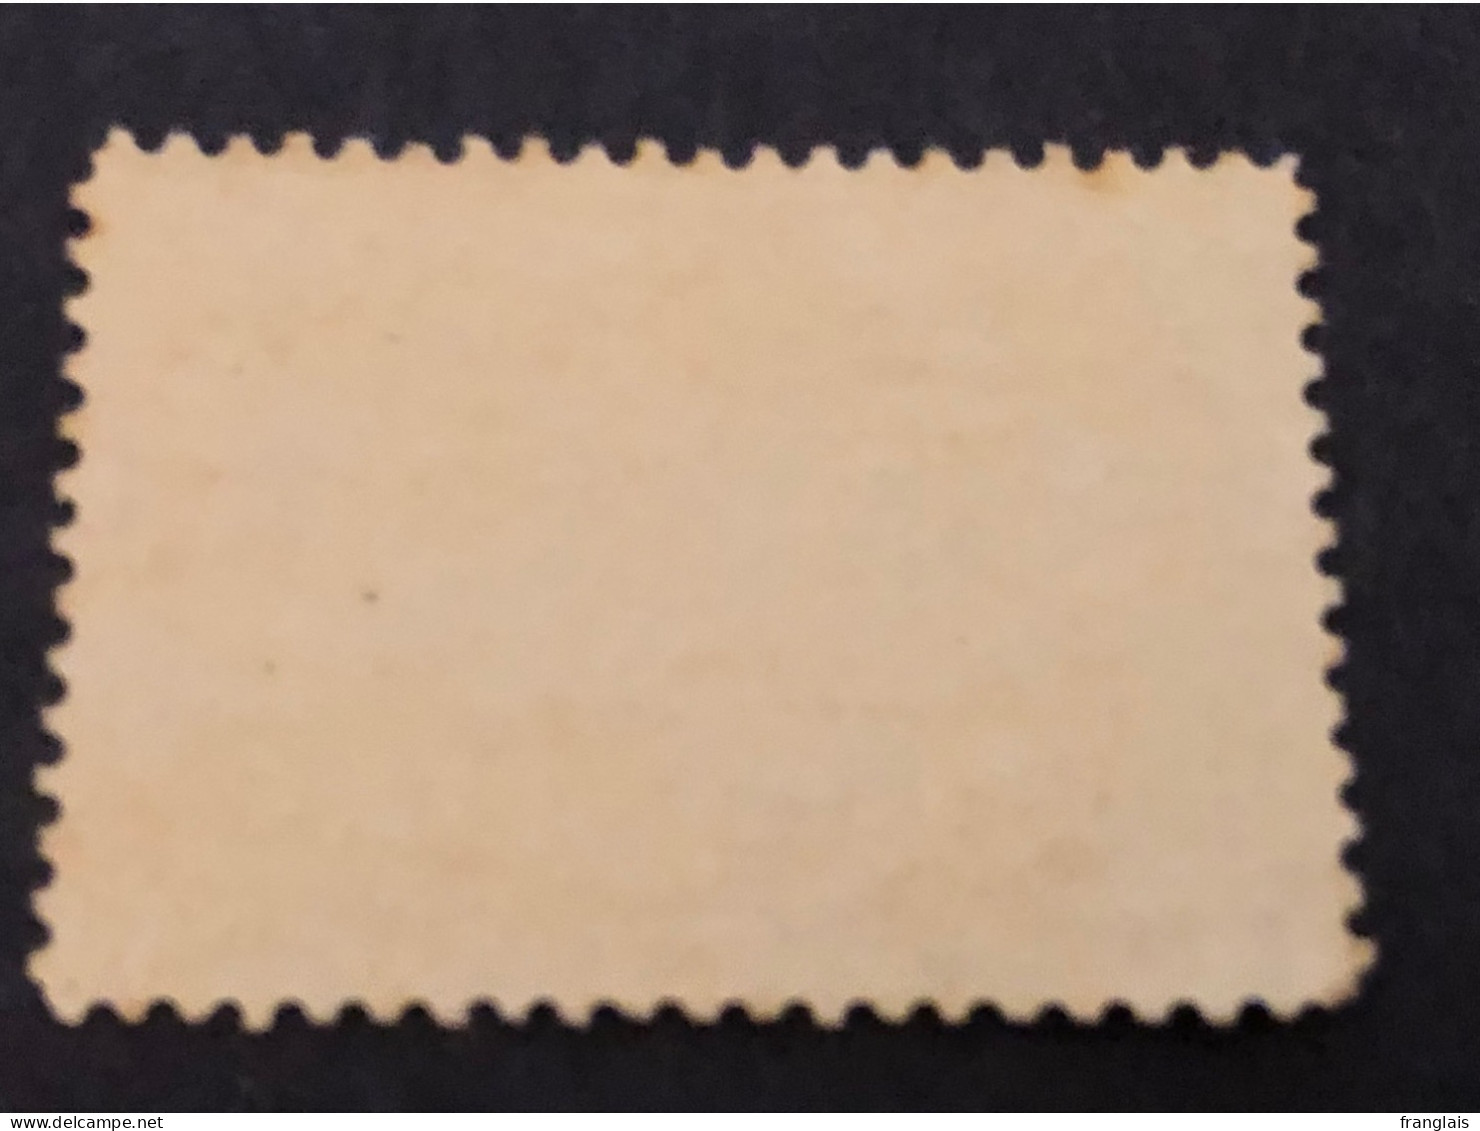 Sc 51 SG 121 Jubilee Issue Of 1897 1 Cent Yellow MNH** CV £13 - Unused Stamps